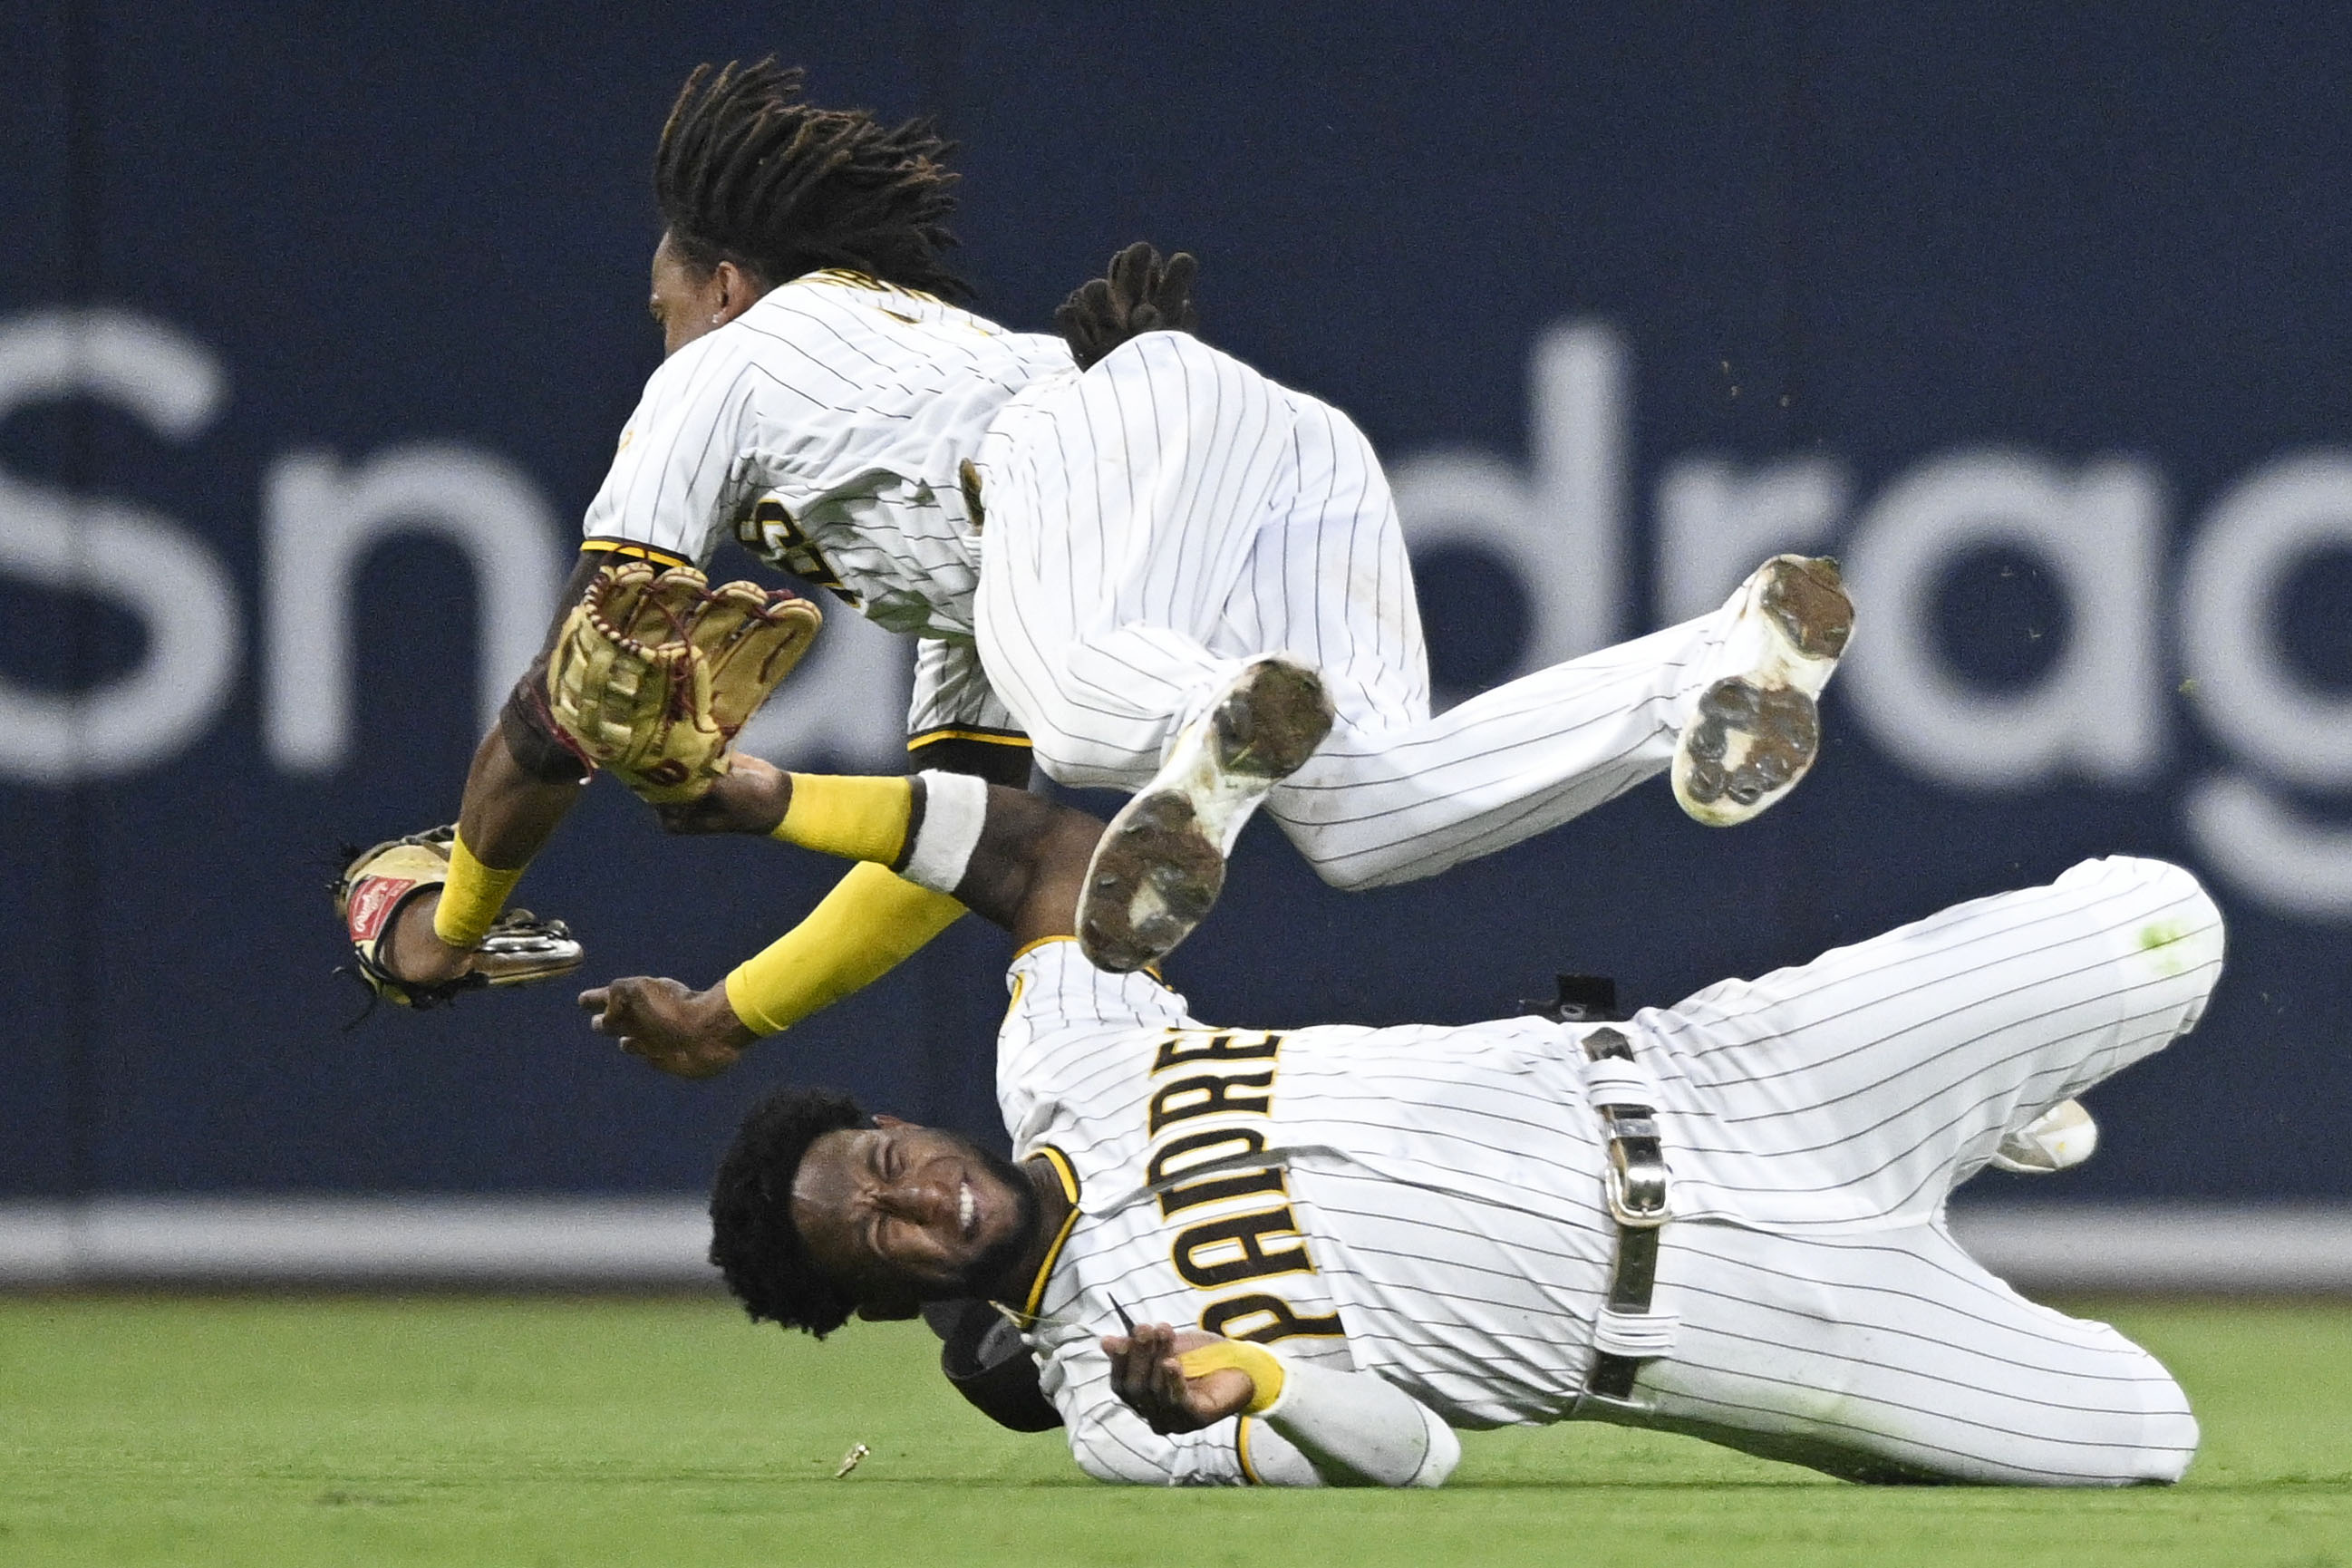 Padres' Jurickson Profar placed on concussion IL after scary